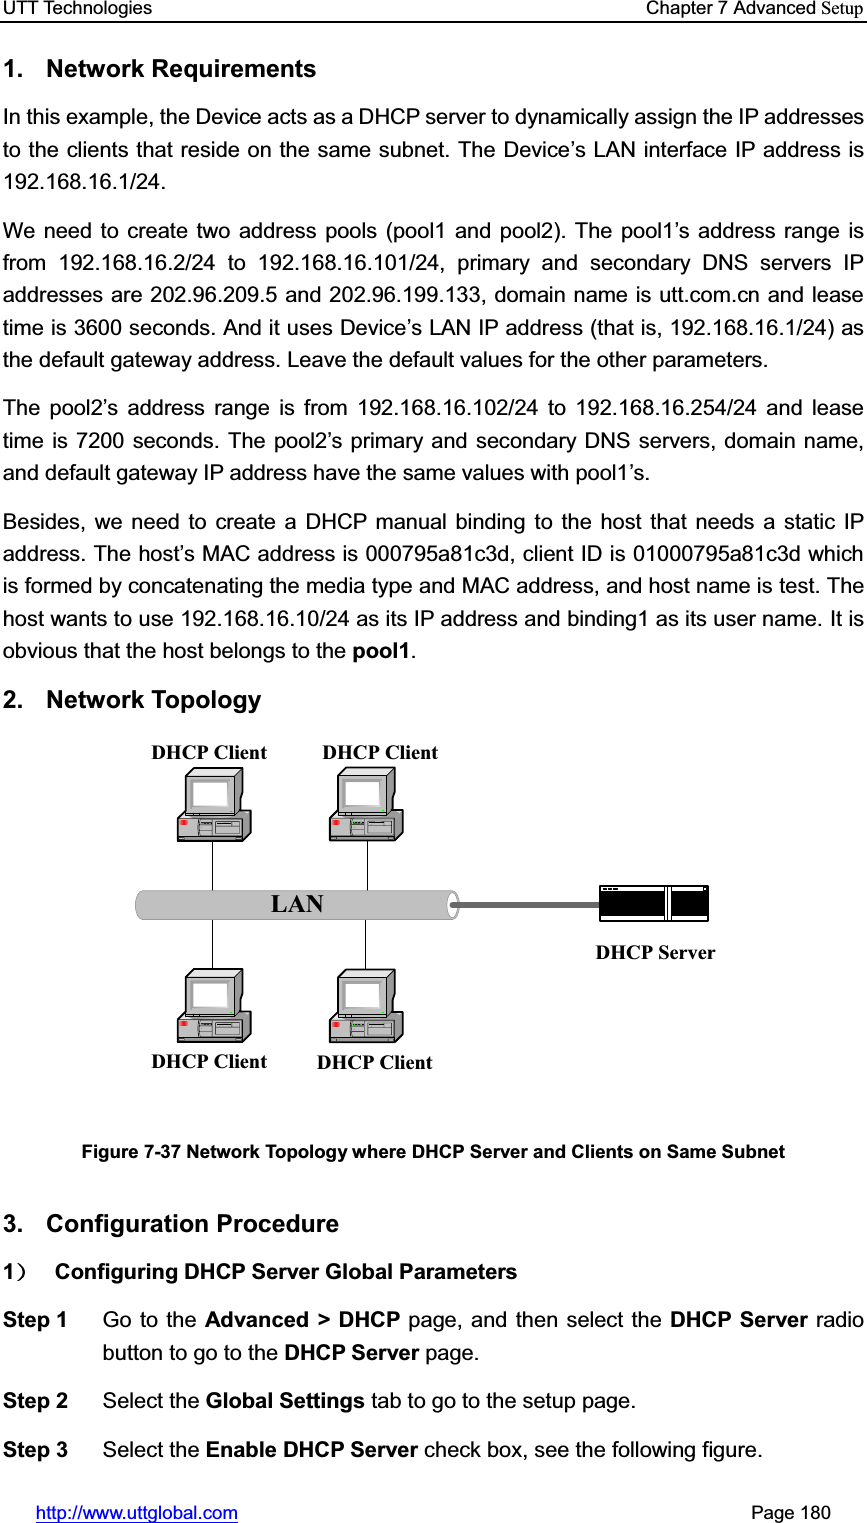 UTT Technologies    Chapter 7 Advanced Setuphttp://www.uttglobal.com                                                       Page 180 1. Network Requirements In this example, the Device acts as a DHCP server to dynamically assign the IP addressesto the clients that reside on the same subnet. The Device¶s LAN interface IP address is 192.168.16.1/24.  We need to create two address pools (pool1 and pool2). The pool1¶s address range is from 192.168.16.2/24 to 192.168.16.101/24, primary and secondary DNS servers IP addresses are 202.96.209.5 and 202.96.199.133, domain name is utt.com.cn and lease time is 3600 seconds. And it uses Device¶s LAN IP address (that is, 192.168.16.1/24) as the default gateway address. Leave the default values for the other parameters. The pool2¶s address range is from 192.168.16.102/24 to 192.168.16.254/24 and lease time is 7200 seconds. The pool2¶s primary and secondary DNS servers, domain name, and default gateway IP address have the same values with pool1¶s.Besides, we need to create a DHCP manual binding to the host that needs a static IP address. The host¶s MAC address is 000795a81c3d, client ID is 01000795a81c3d which is formed by concatenating the media type and MAC address, and host name is test. The host wants to use 192.168.16.10/24 as its IP address and binding1 as its user name. It is obvious that the host belongs to the pool1.2. Network Topology LANDHCP Client DHCP ClientDHCP Client DHCP ClientDHCP ServerFigure 7-37 Network Topology where DHCP Server and Clients on Same Subnet3. Configuration Procedure 1˅ Configuring DHCP Server Global Parameters Step 1  Go to the Advanced &gt; DHCP page, and then select the DHCP Server radio button to go to the DHCP Server page. Step 2  Select the Global Settings tab to go to the setup page. Step 3  Select the Enable DHCP Server check box, see the following figure. 